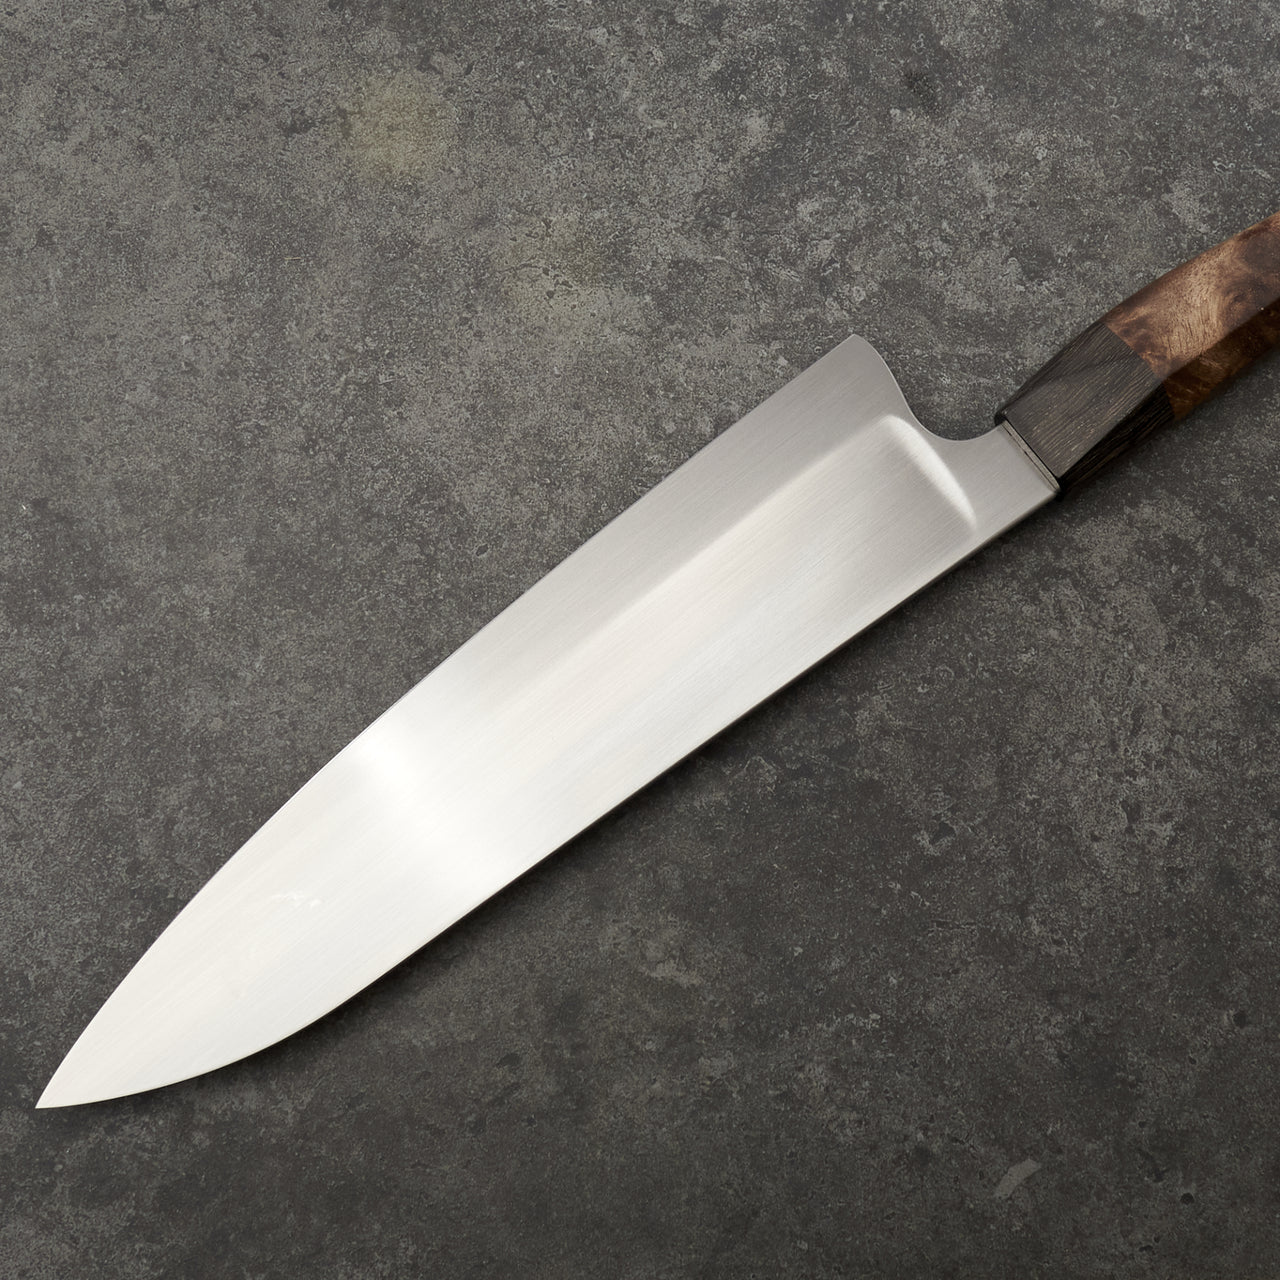 Lew Griffin Gyuto 220mm AEB-L Stainless Steel - "S" Grind - Profile